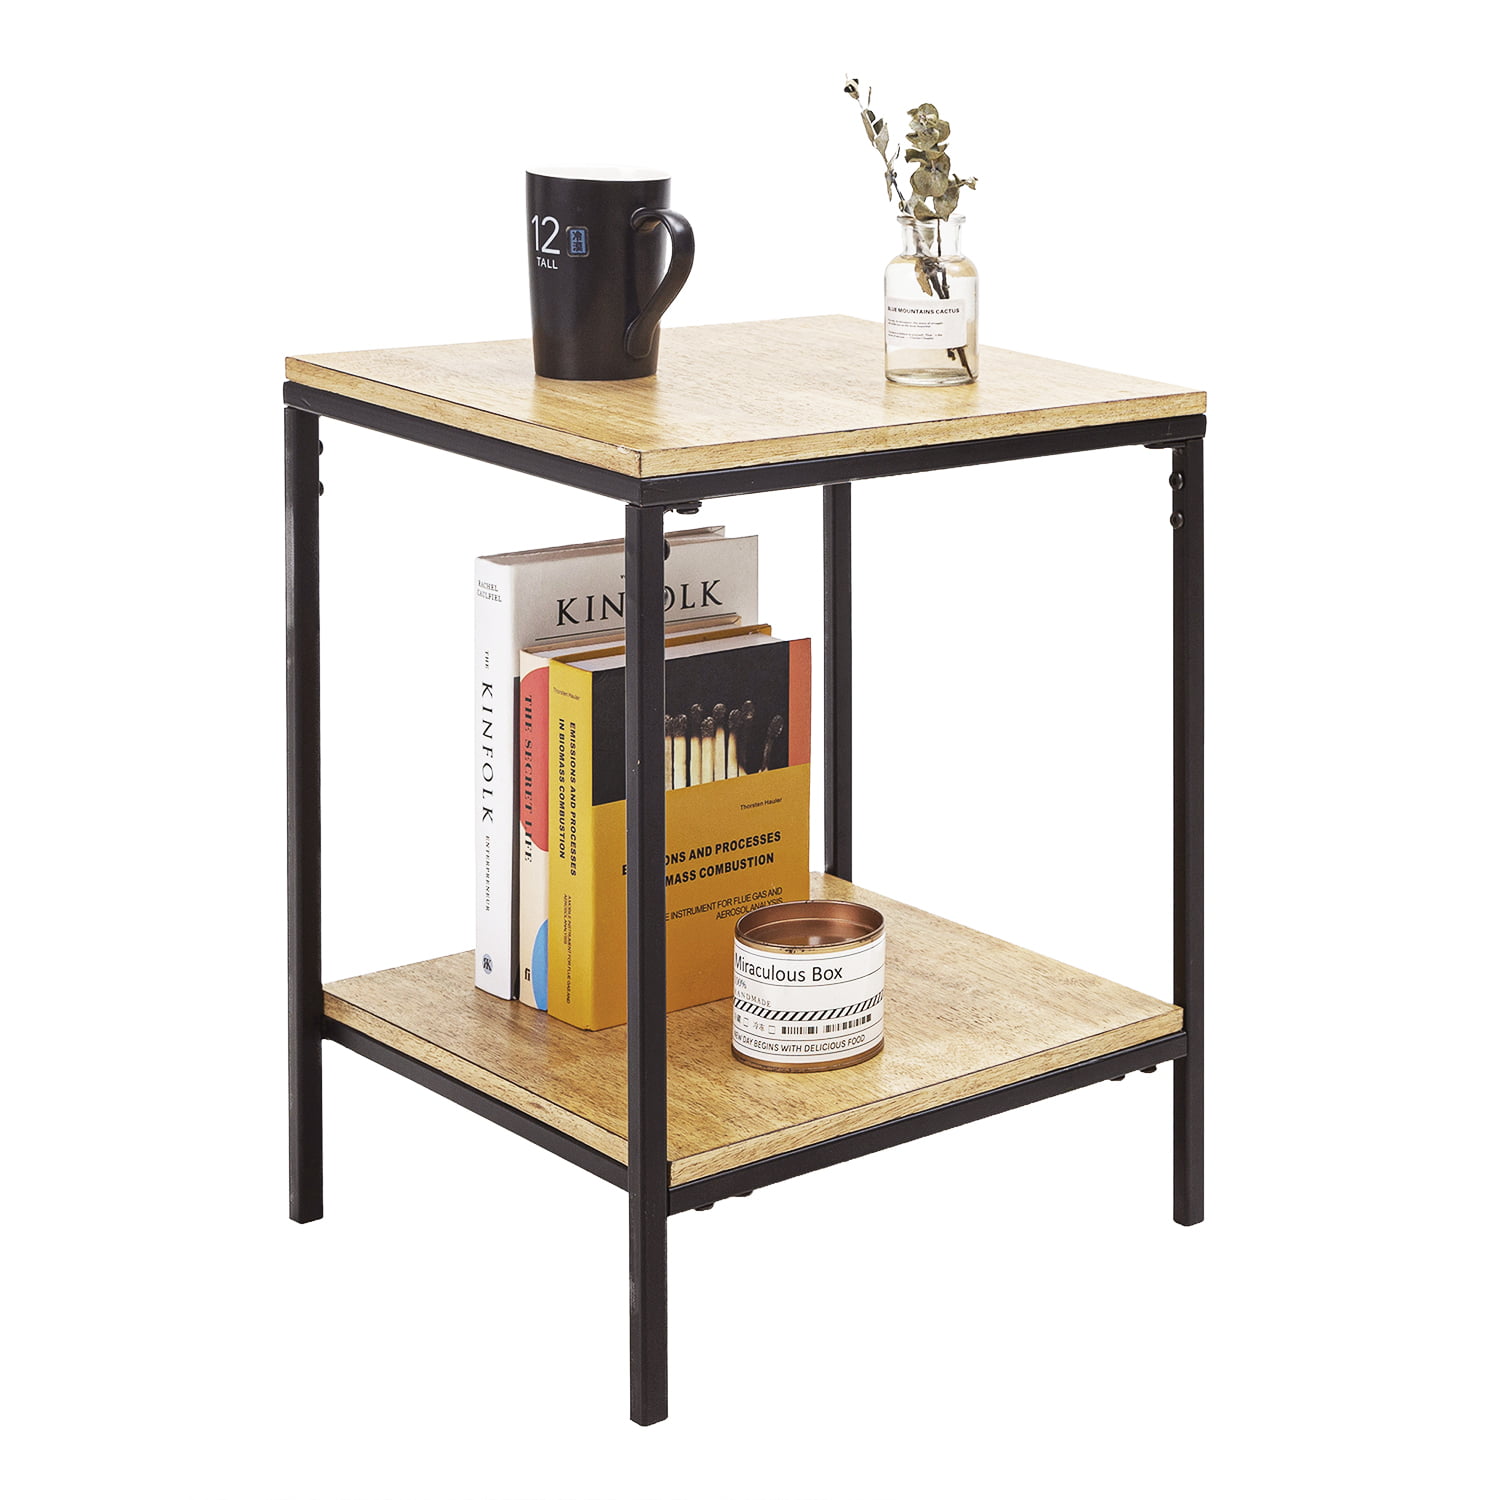 Wood Look Accent Furniture with Metal Frame NXN-HOME Industrial Side Table Record Player Stand with Storage Shelf for Coffee Books Magazines